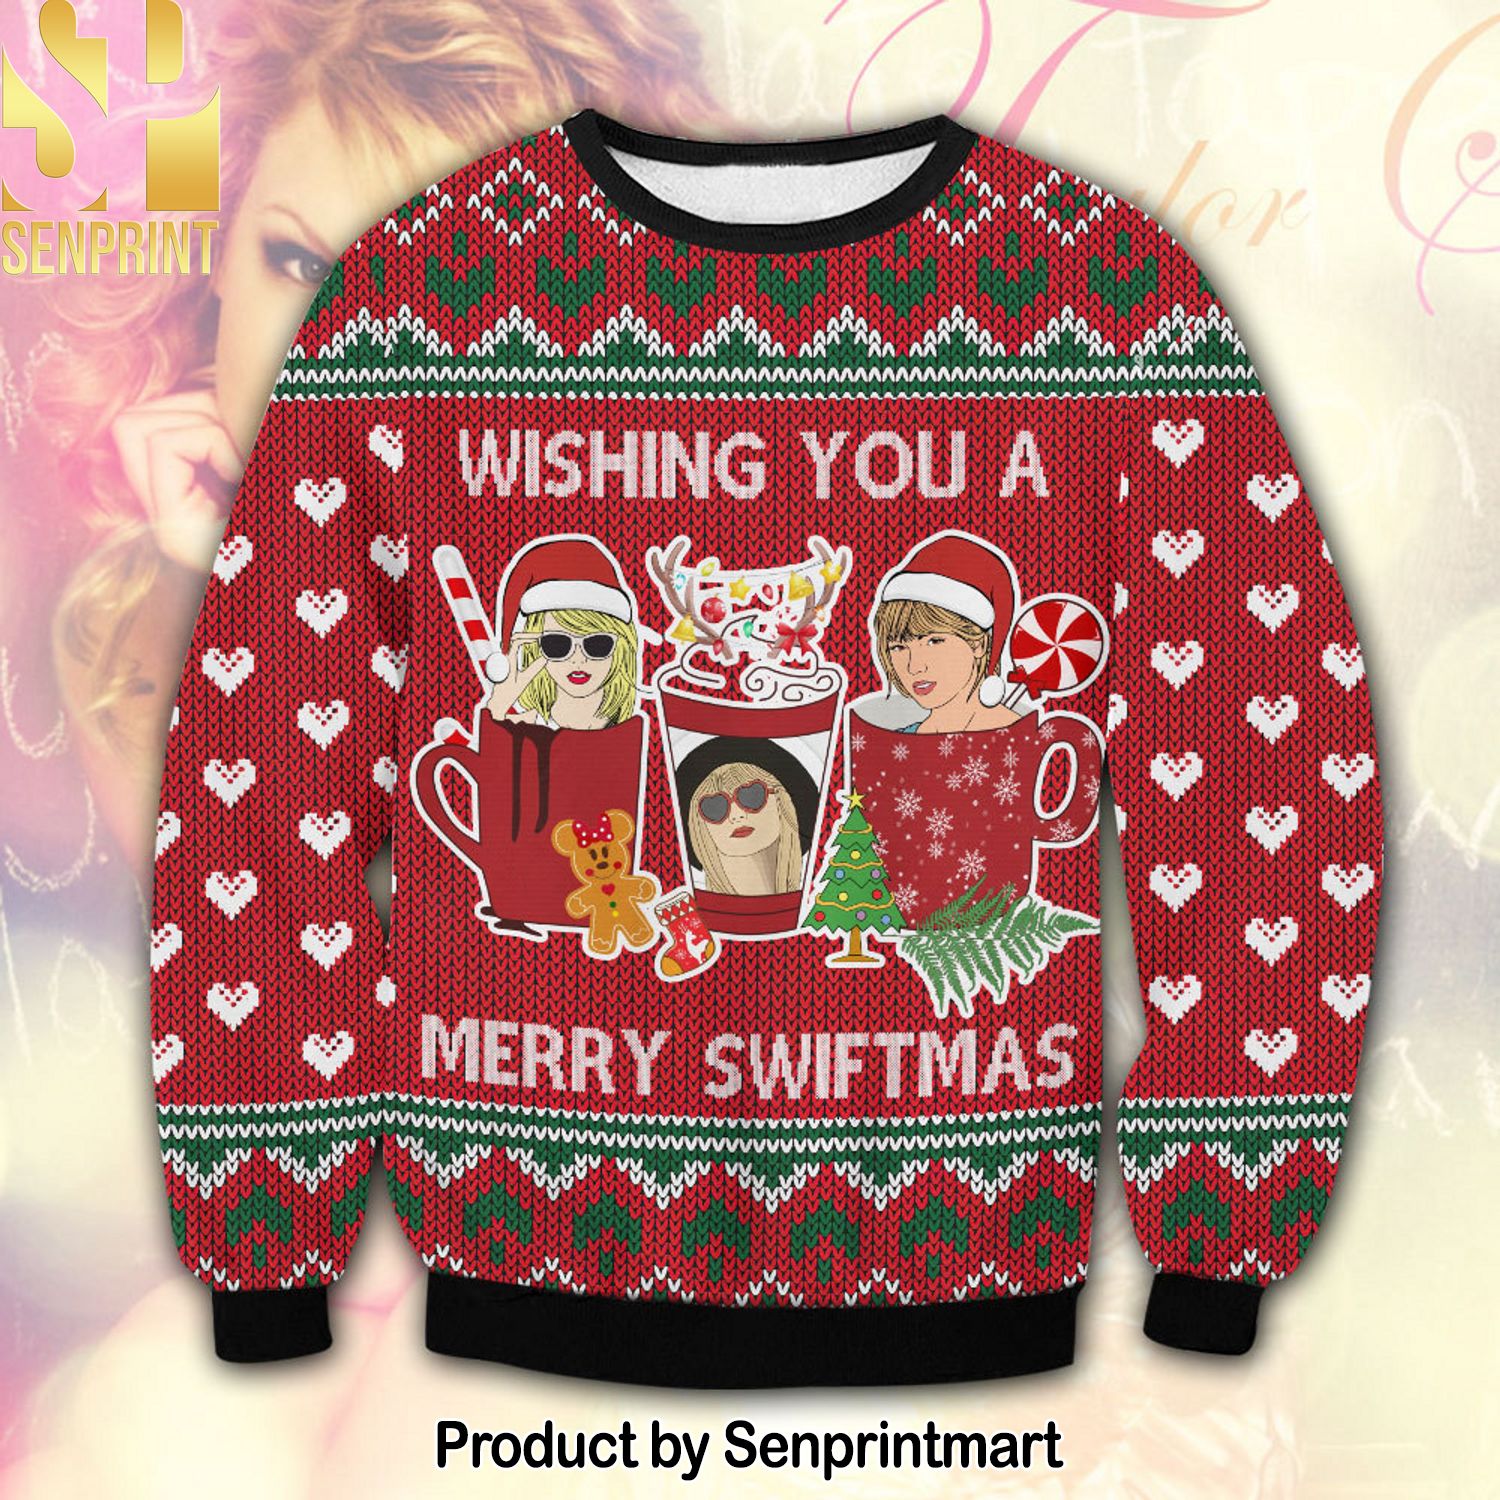 Taylor Swift Wishing You AMerry Swiftmas For Christmas Gifts Ugly Xmas Wool Knitted Sweater